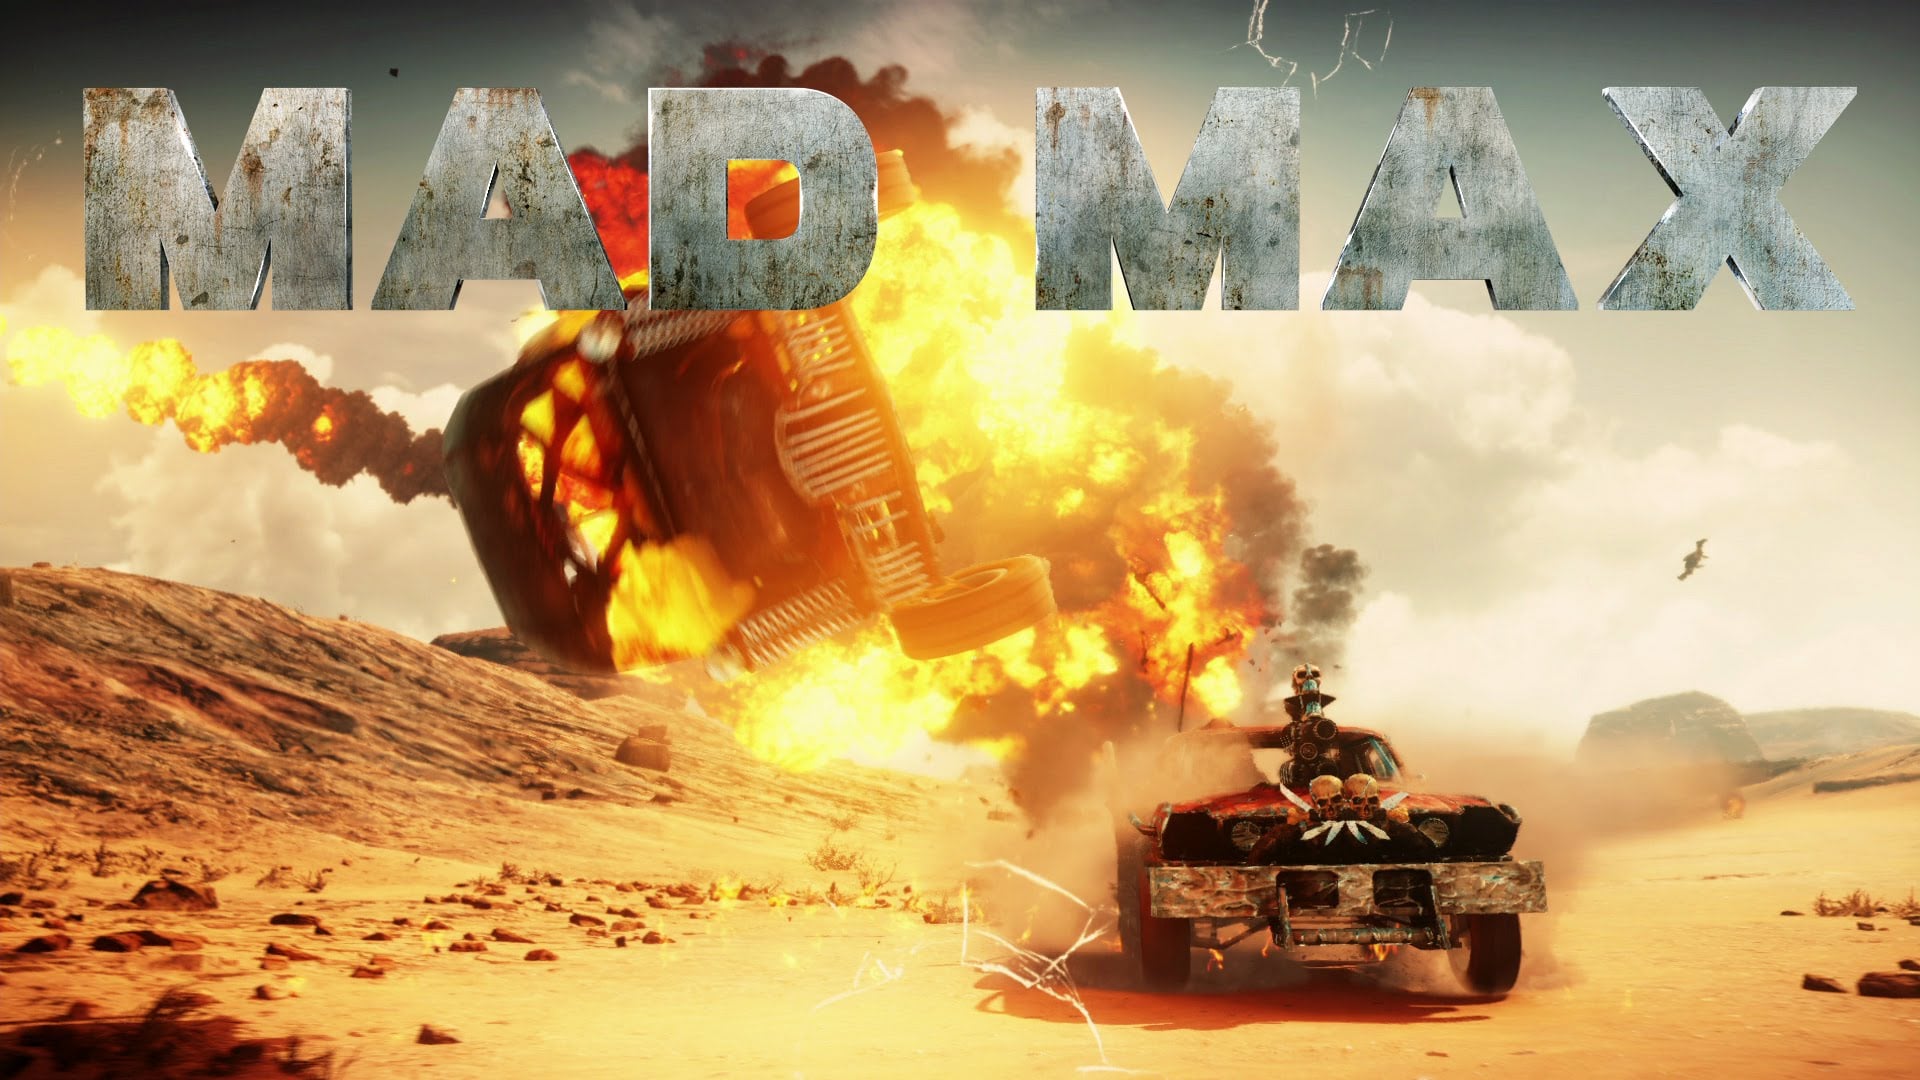 Download game pc mad max